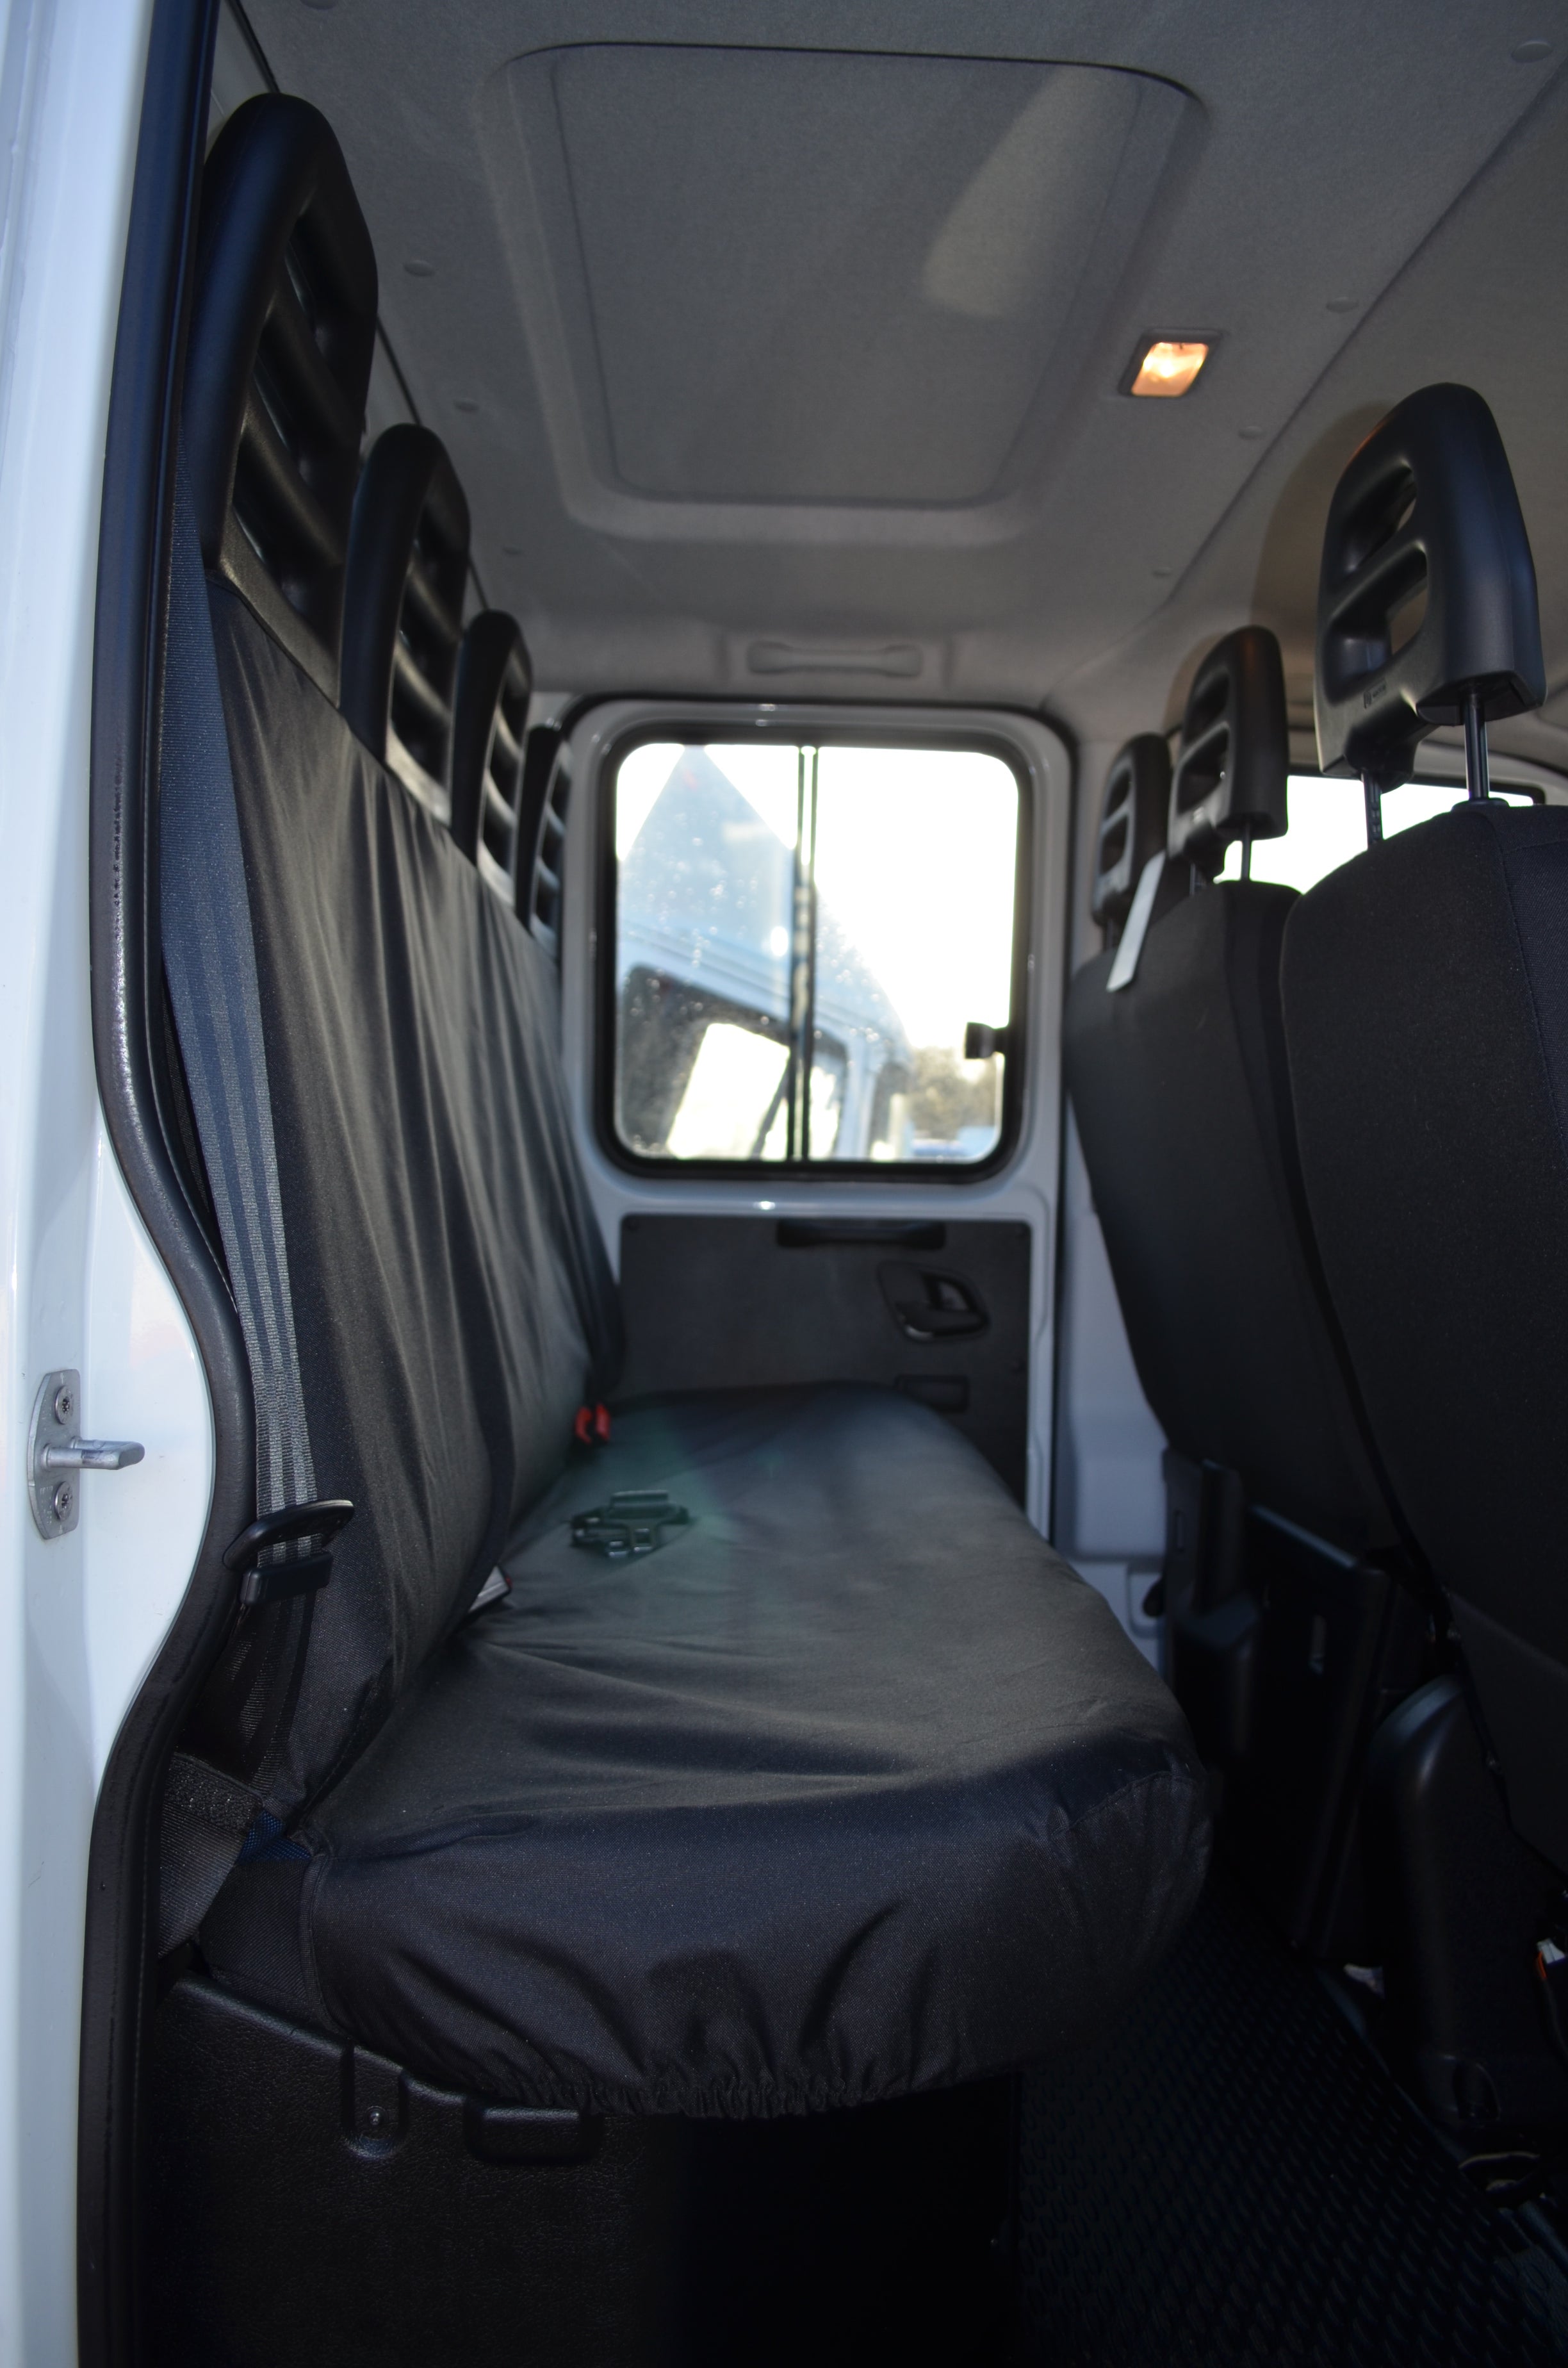 Iveco Daily Van 2014 Onwards Tailored Rear Seat Covers Black Turtle Covers Ltd